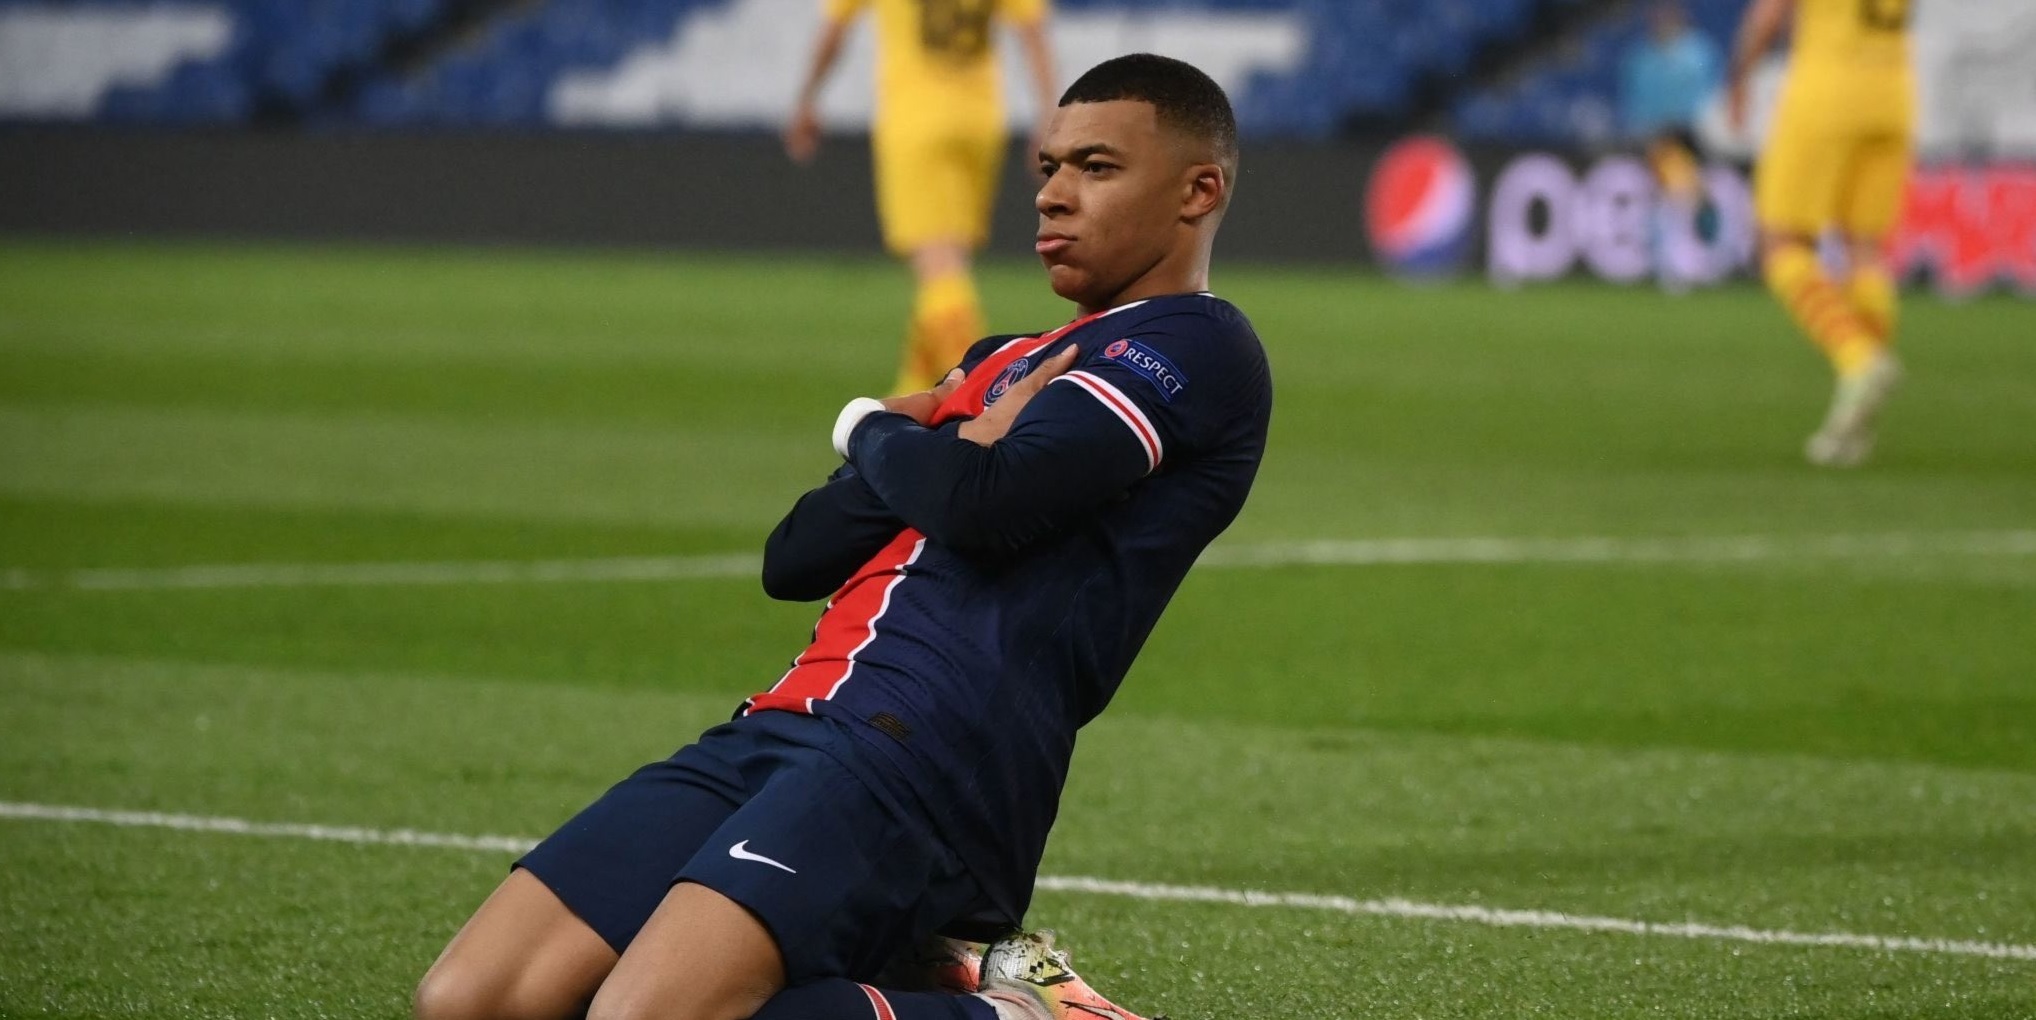 Kylian Mbappe hints he needs to leave France due to media scrutiny